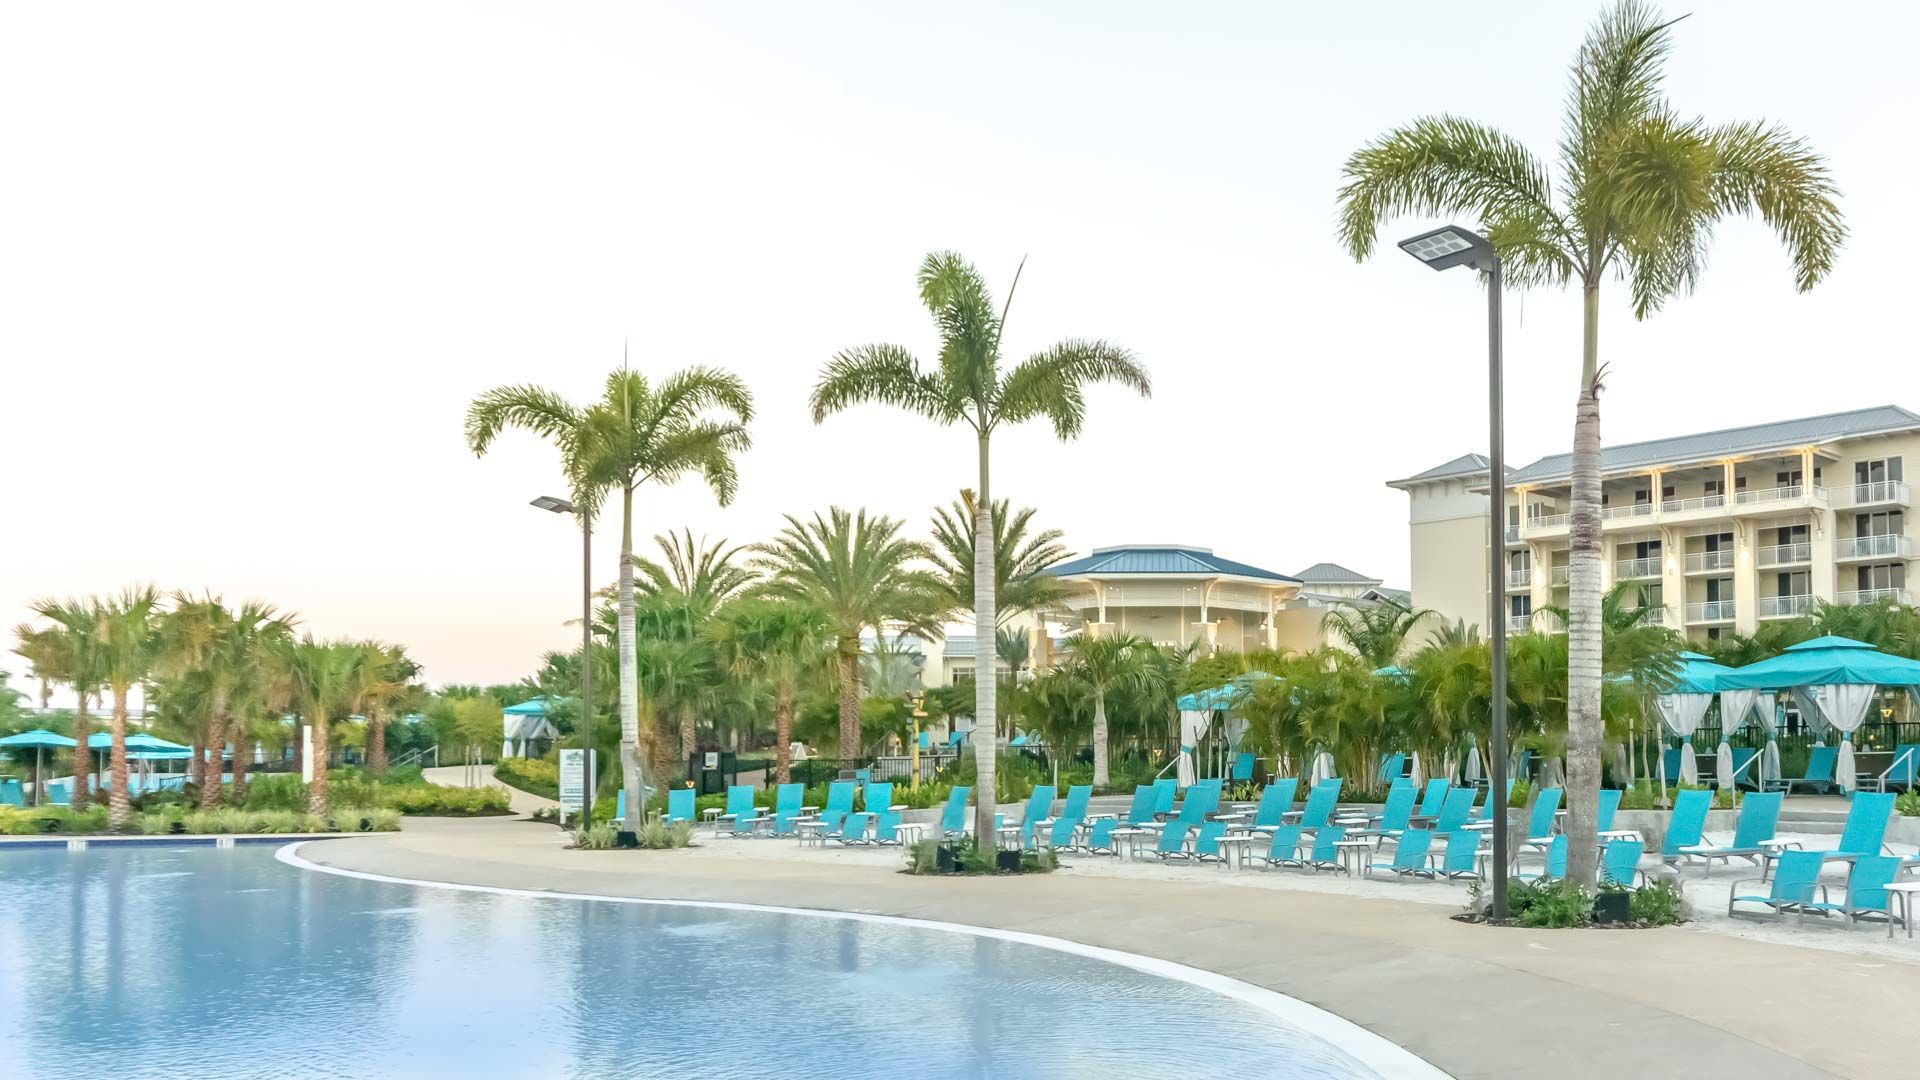 Fins Up Beach Club lined with palm trees and lounge chairs next to the Fins Up Pool at Margaritaville Resort Orlando.